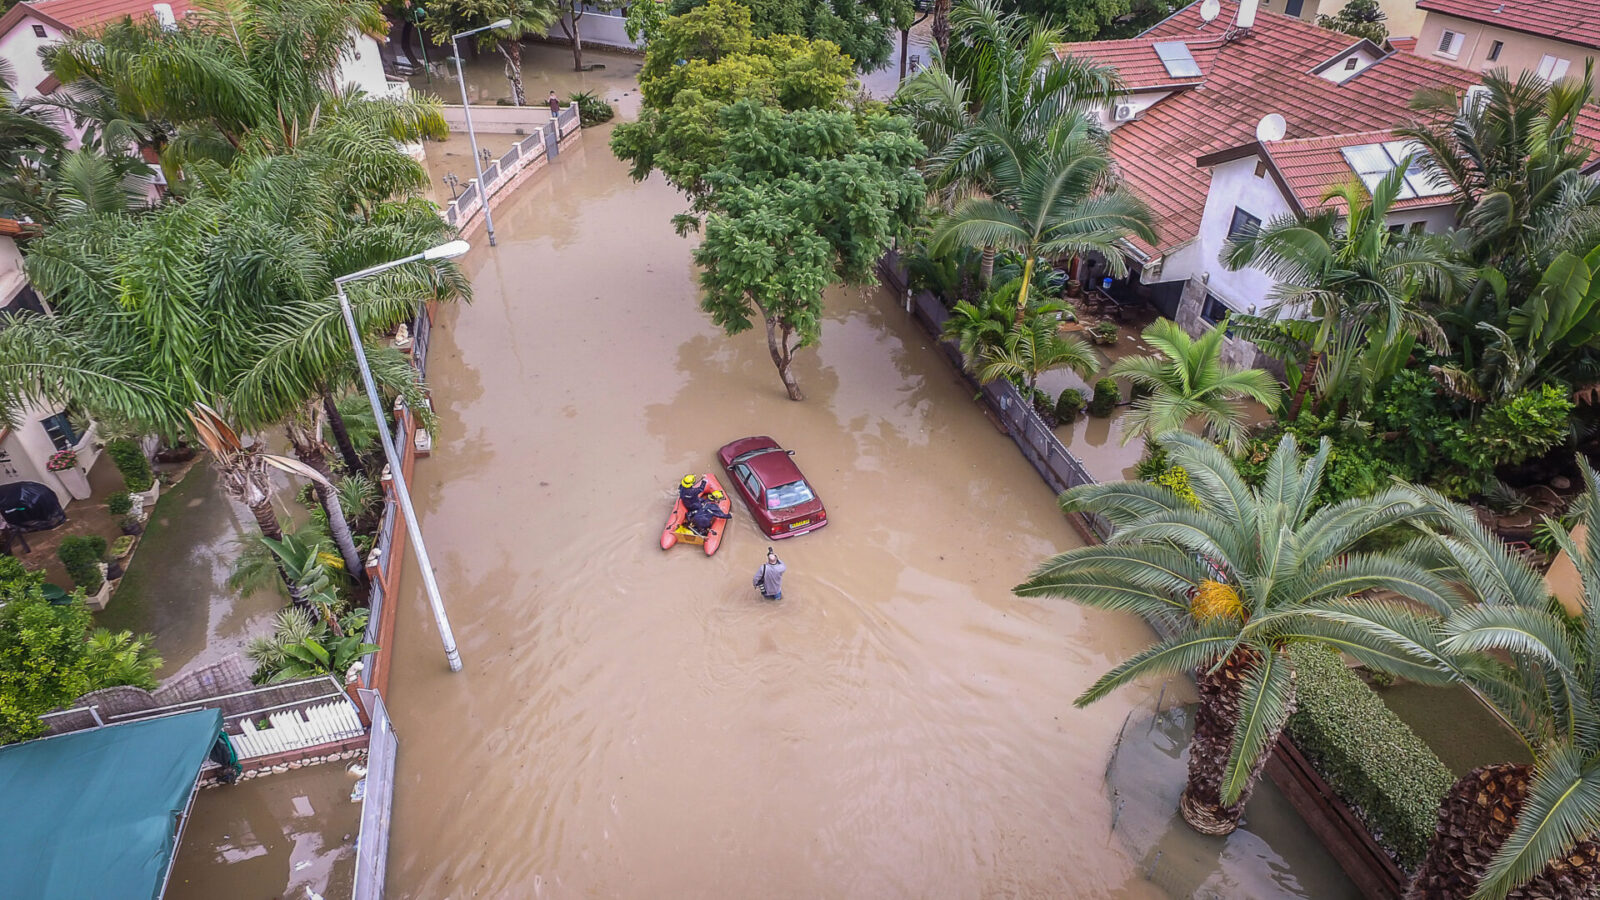 Why flash floods are intensifying and what to do about it ISRAEL21c